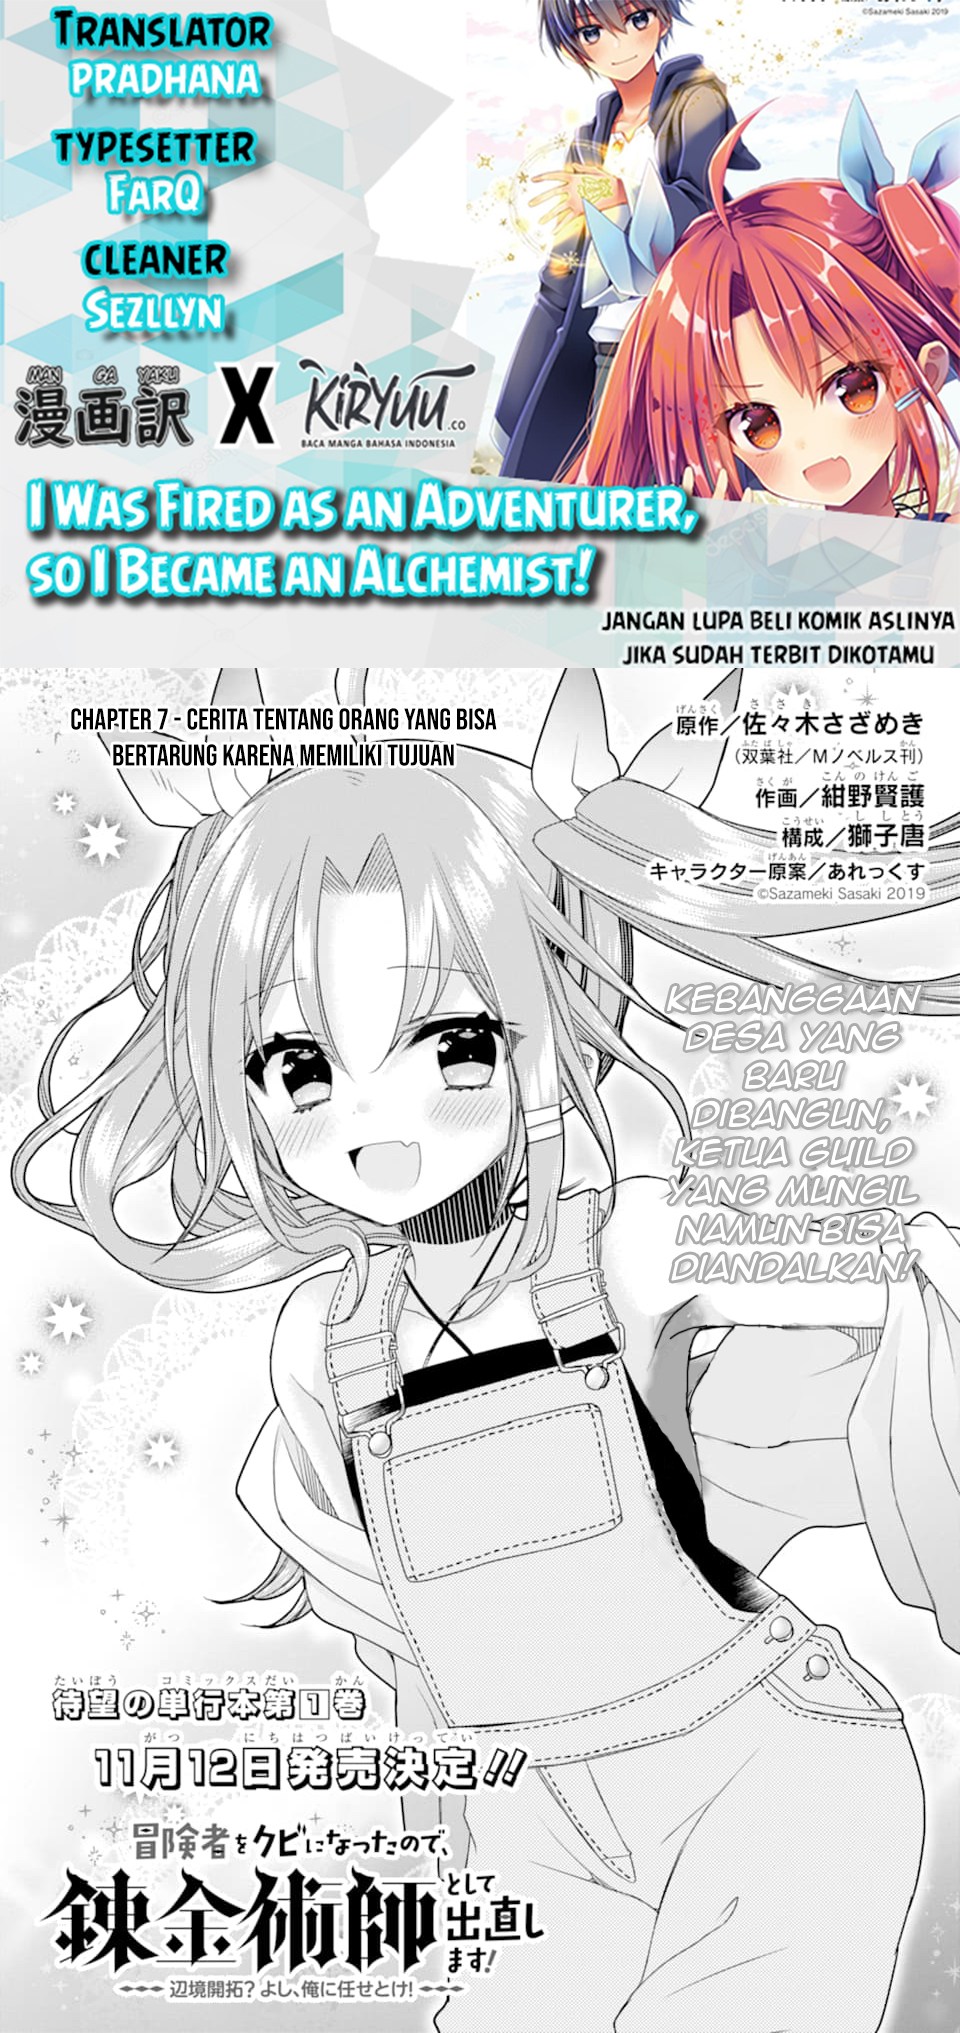 I was fired as an Adventurer, so I became an Alchemist!~ Frontier development? Alright, leave it to me! Chapter 7